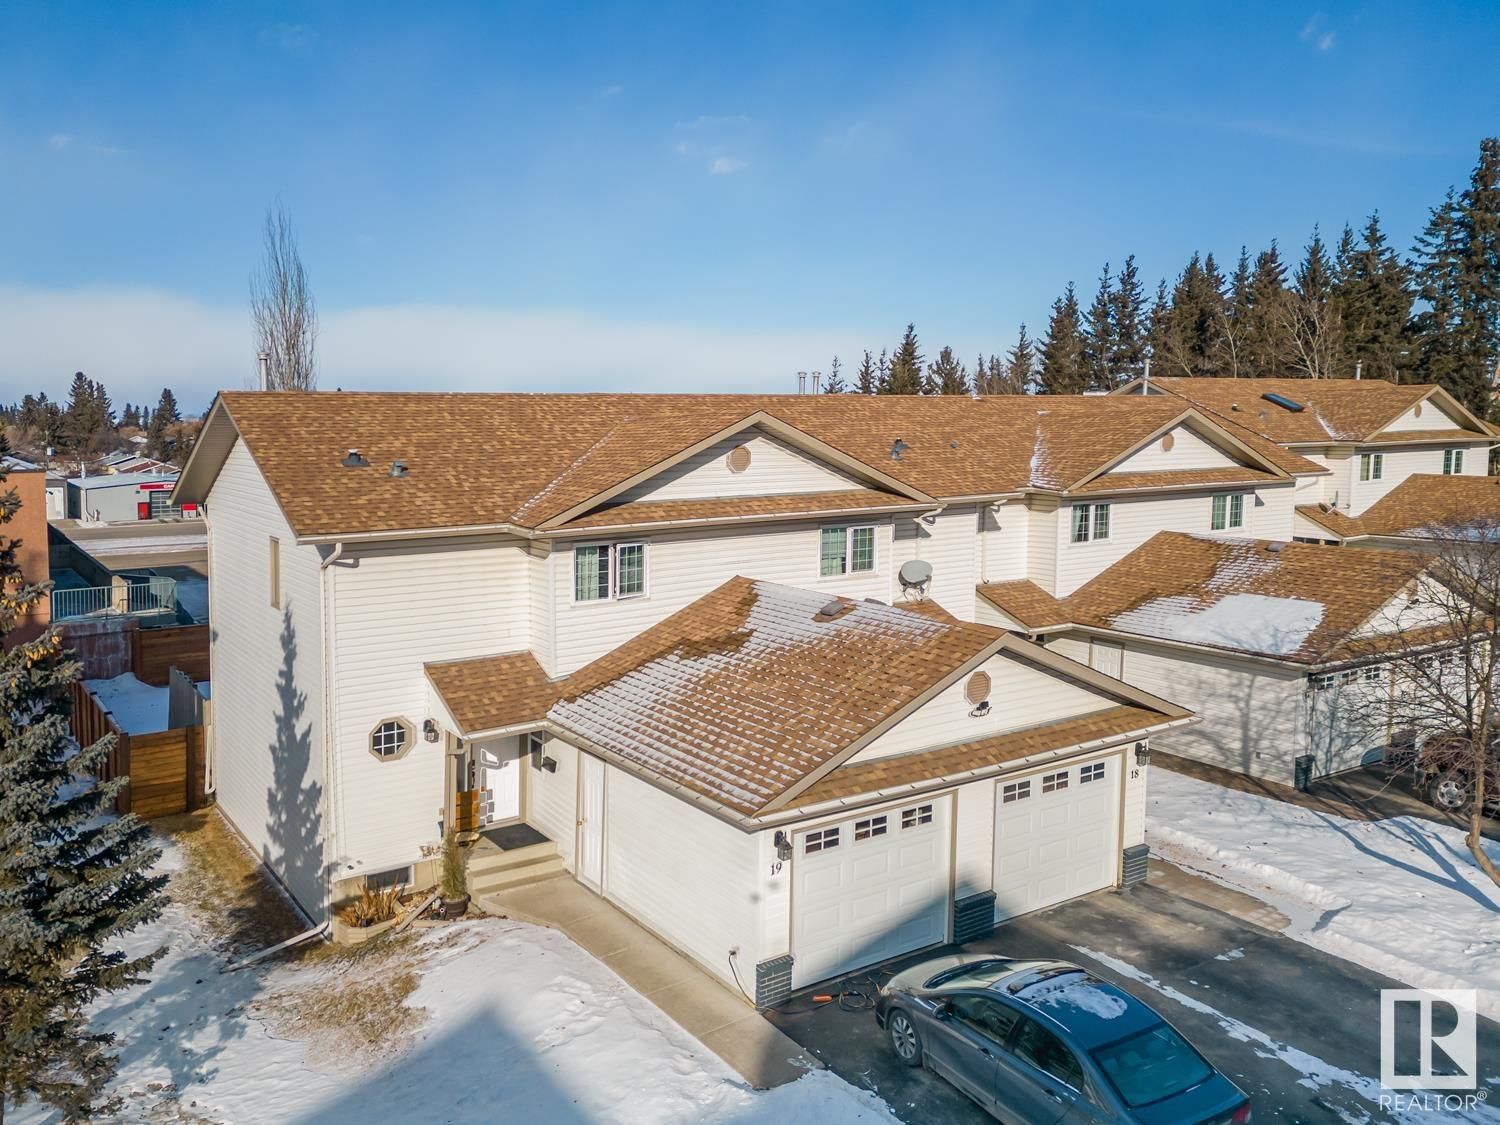 New property listed in Cold Lake, Cold Lake